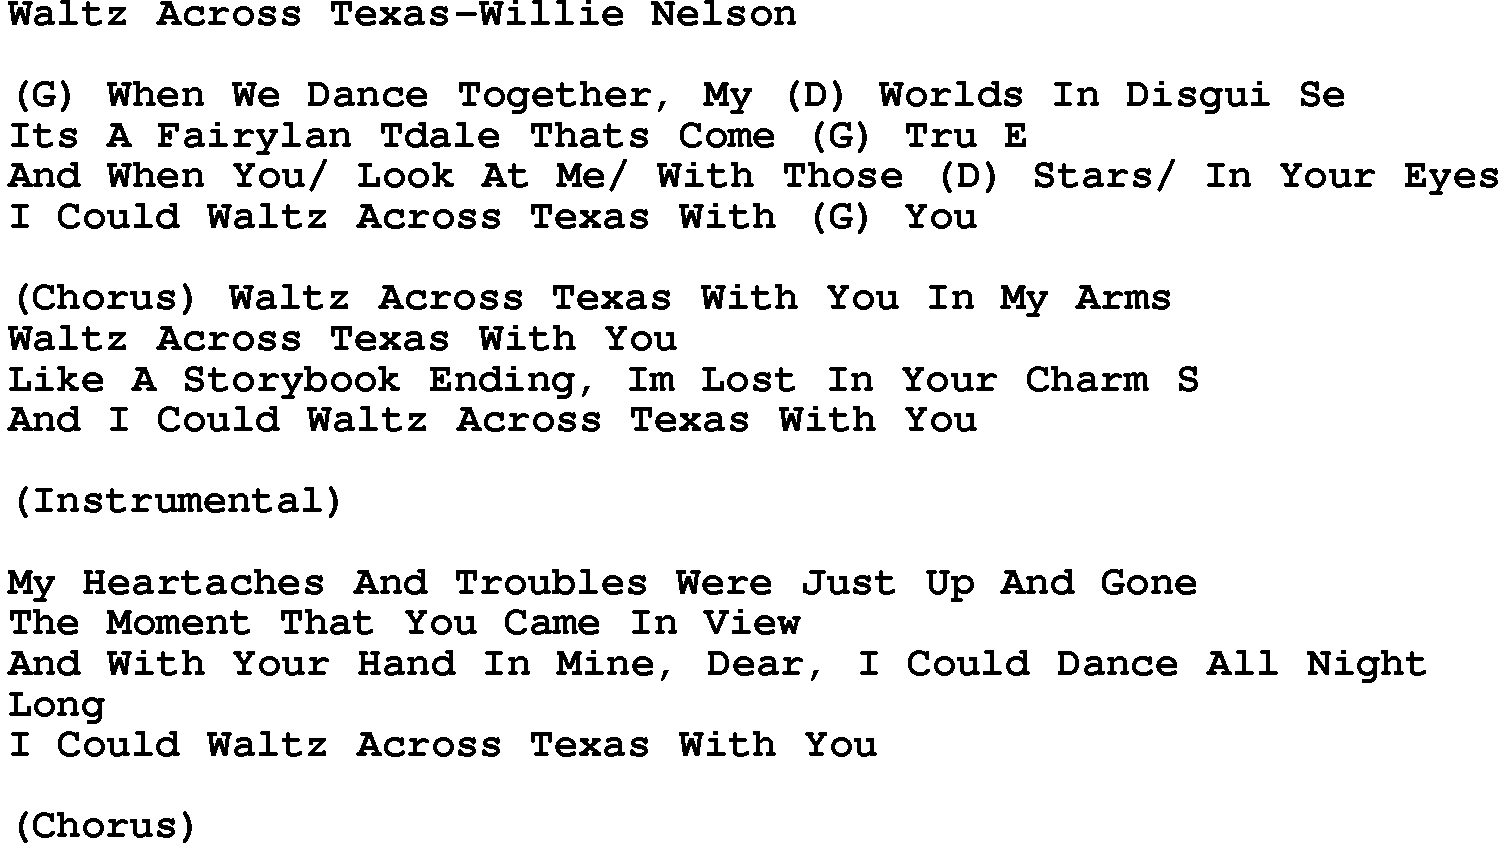 Country music song: Waltz Across Texas-Willie Nelson lyrics and chords